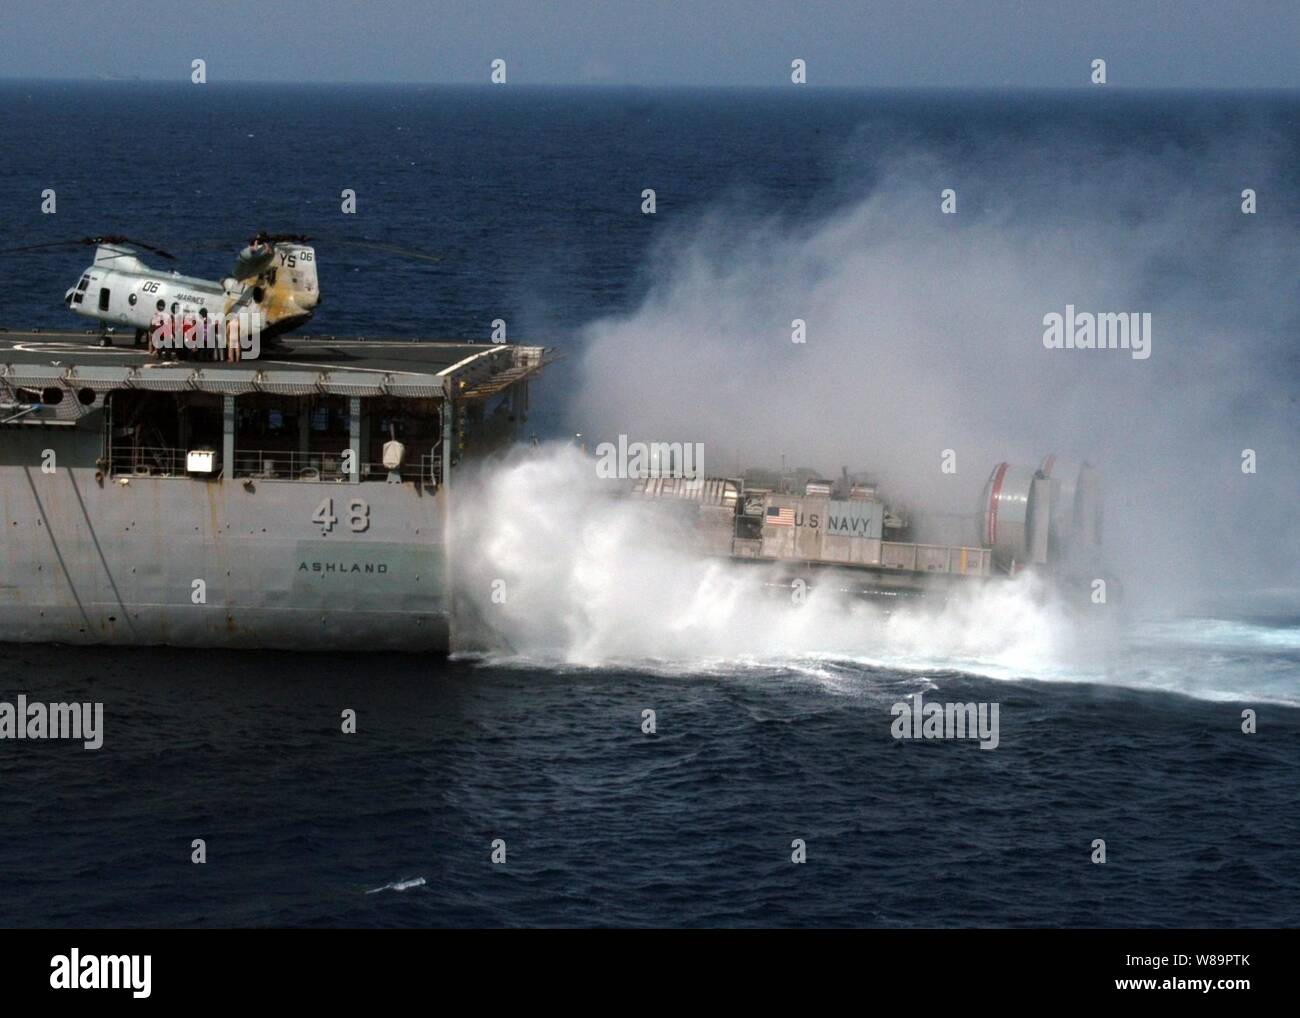 A Navy Landing Craft Air Cushion blows up a curtain of spray as it maneuvers to enter the well deck of the amphibious dock landing ship USS Ashland (LSD 48) during training exercises in the Mediterranean Sea on April 20, 2005.  The Landing Craft Air Cushion, more commonly known as an LCAC, is assigned to Assault Craft Unit 4 deployed onboard the Ashland. Stock Photo